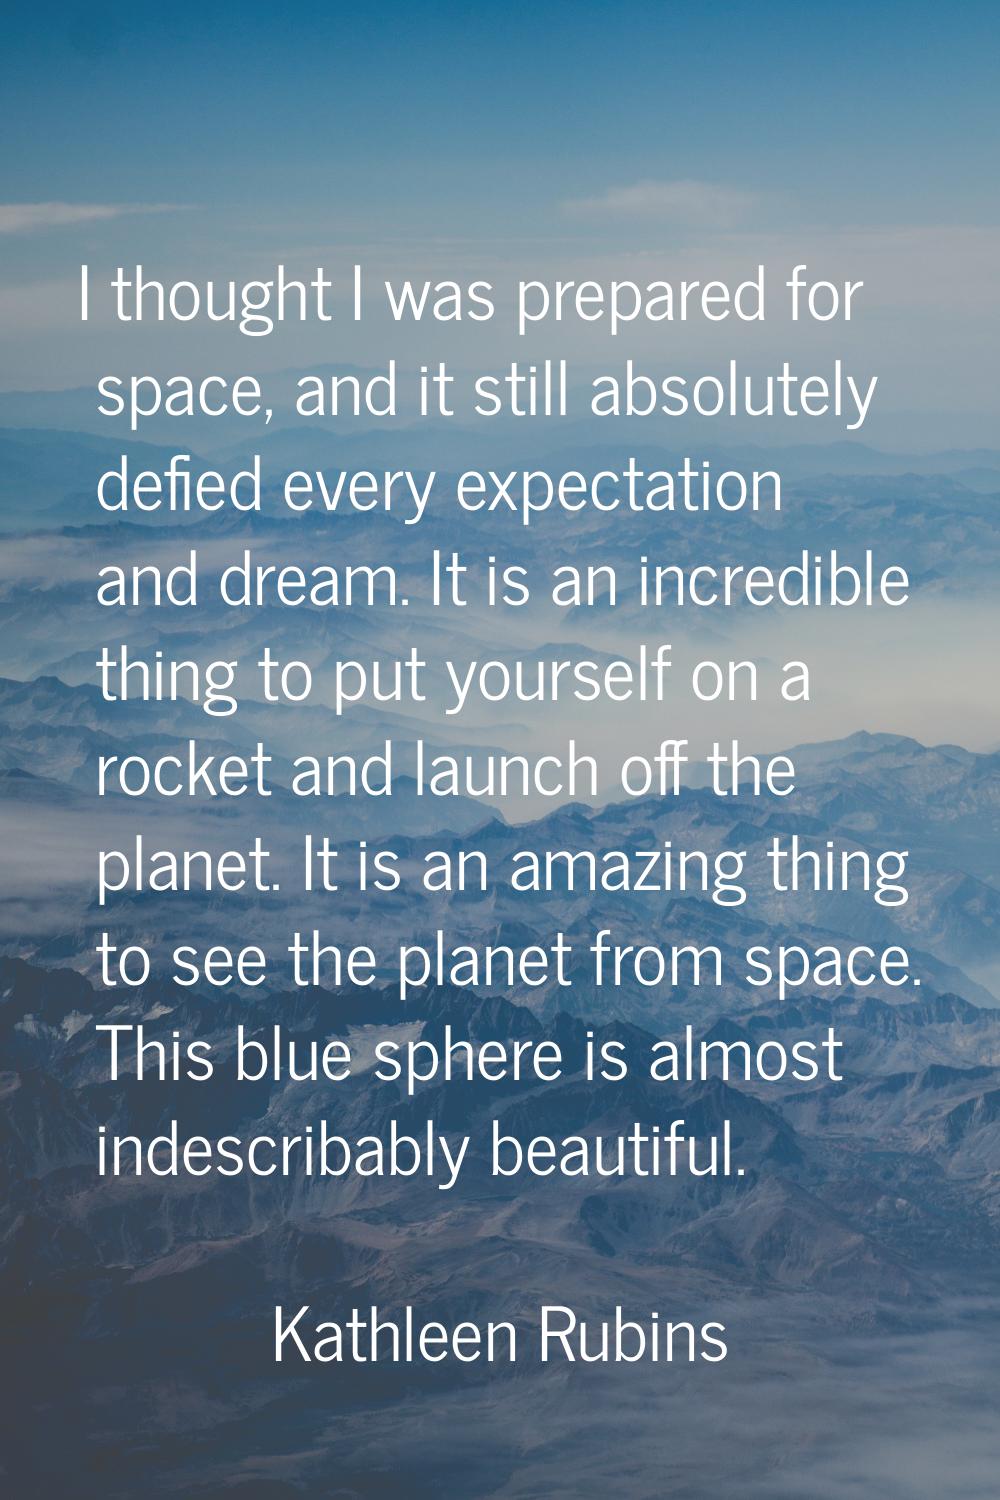 I thought I was prepared for space, and it still absolutely defied every expectation and dream. It 